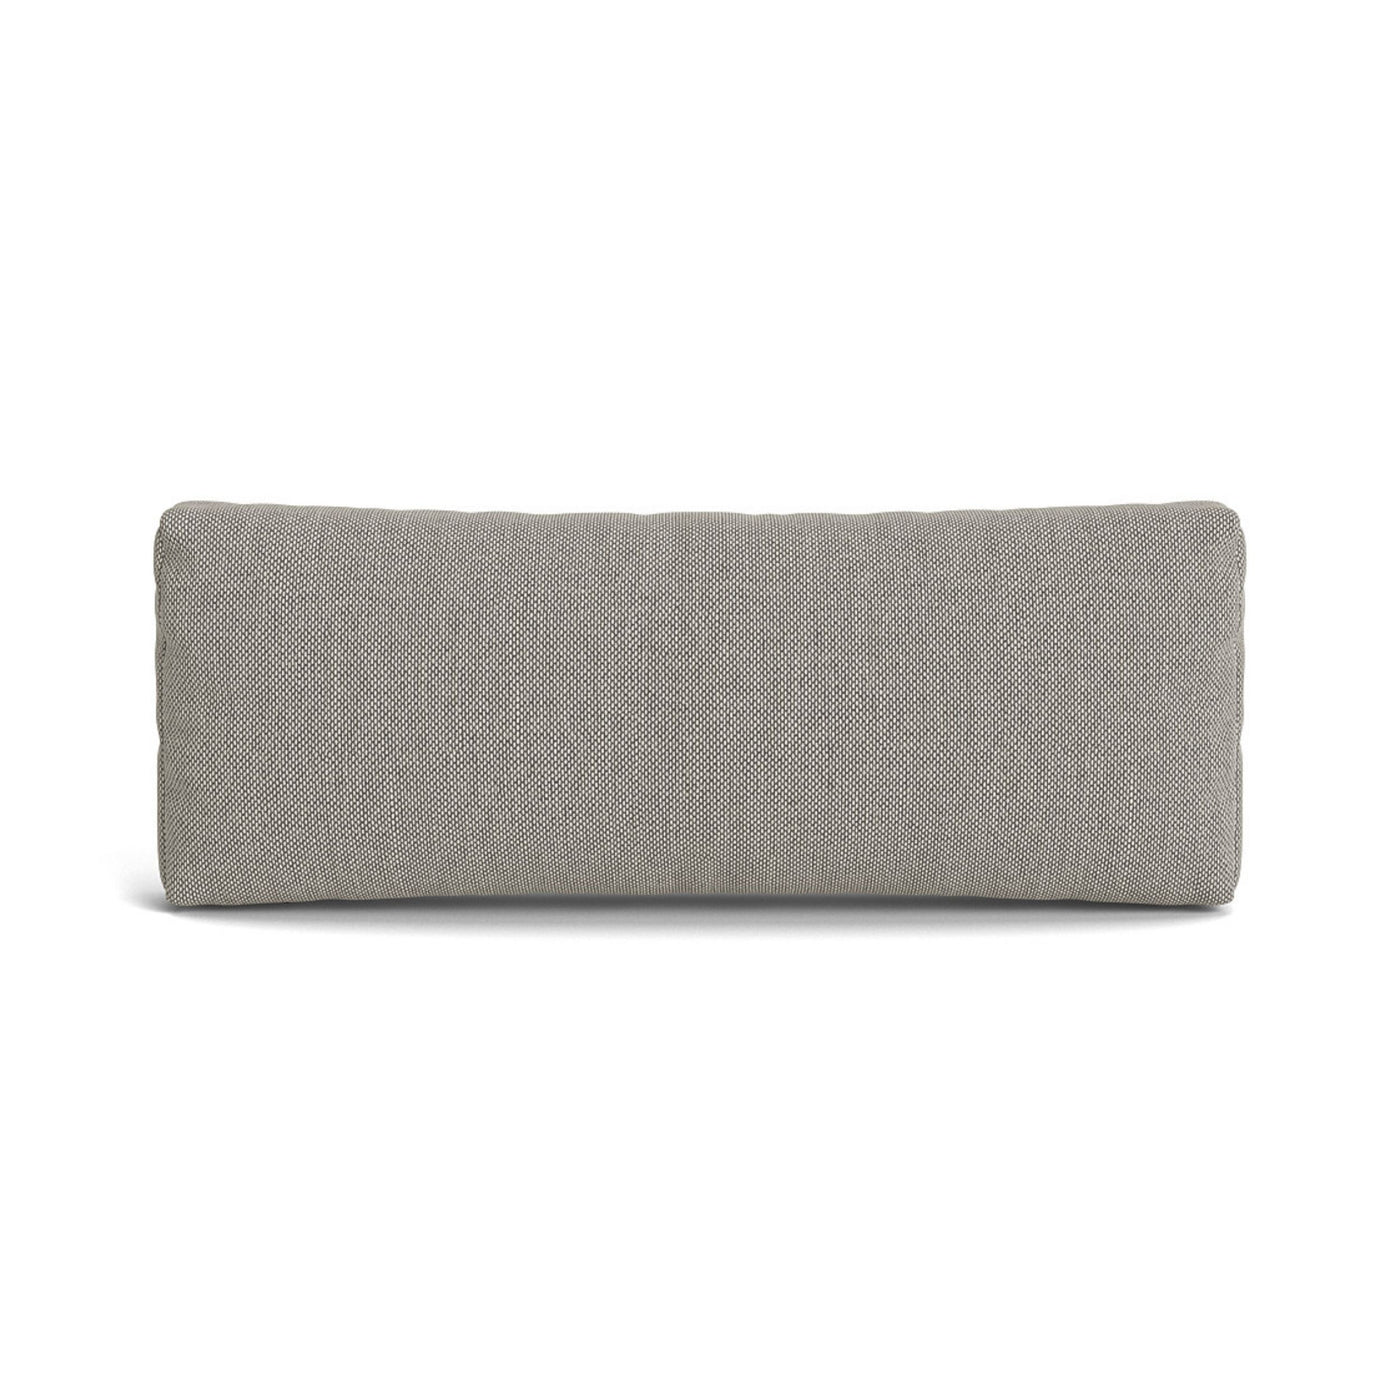 Muuto Connect Soft Modular Sofa Cushion. Shop online at someday designs. #colour_re-wool-218